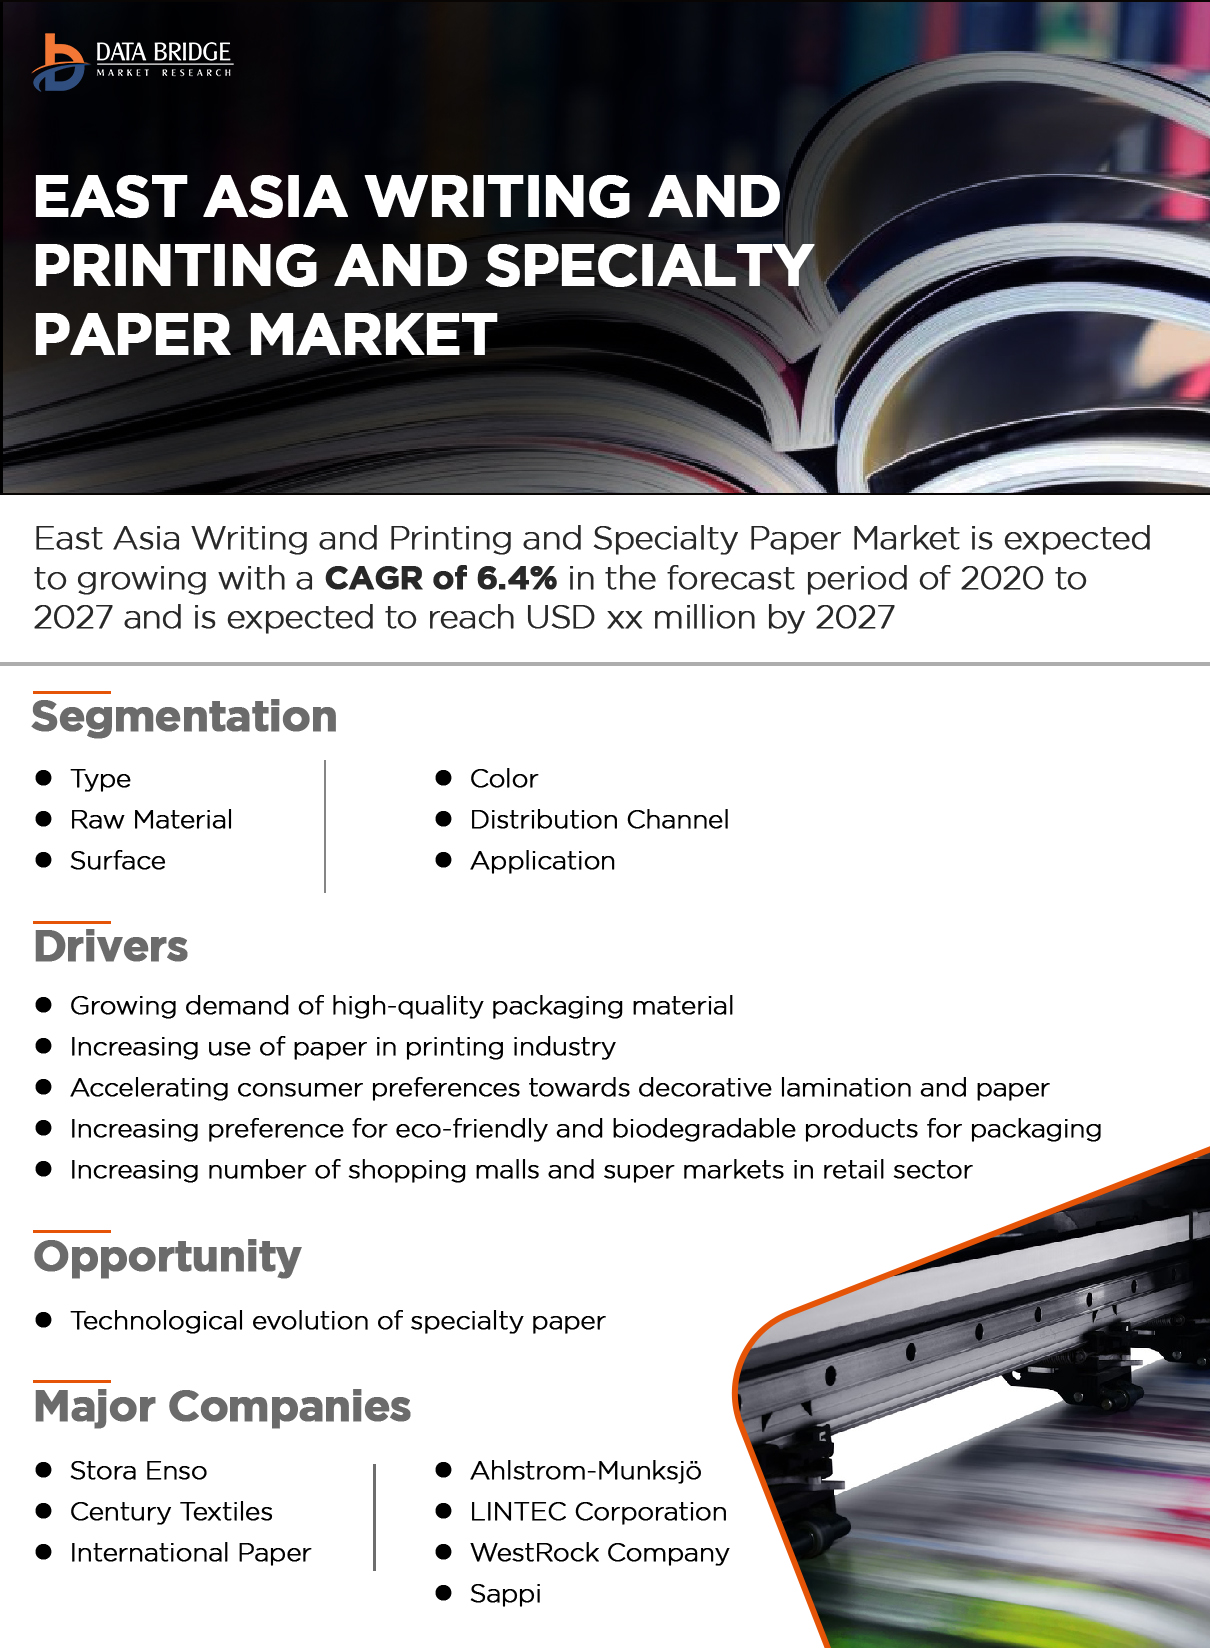 Middle East and Africa Writing and Printing and Specialty Paper Market